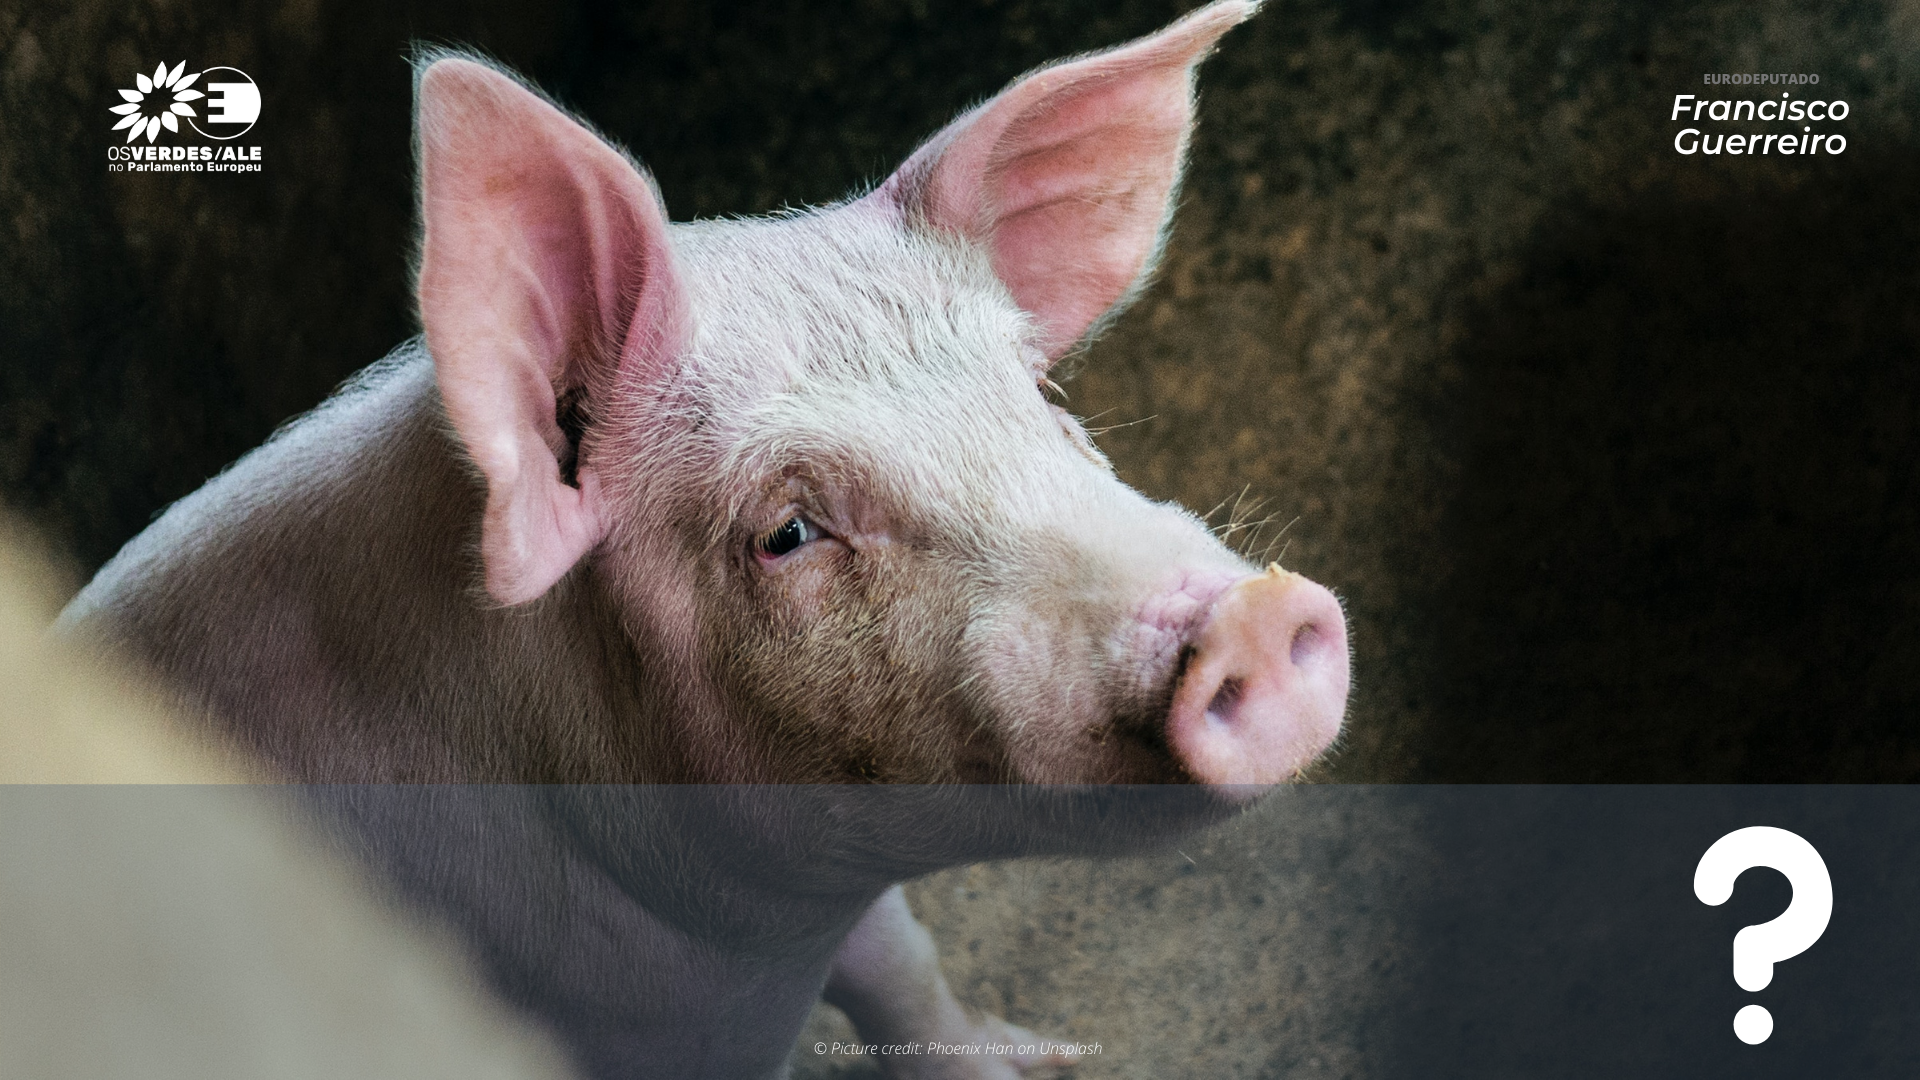 Question to the EC: Docking of pigs’ tails – the Commission’s response to enforcement issues